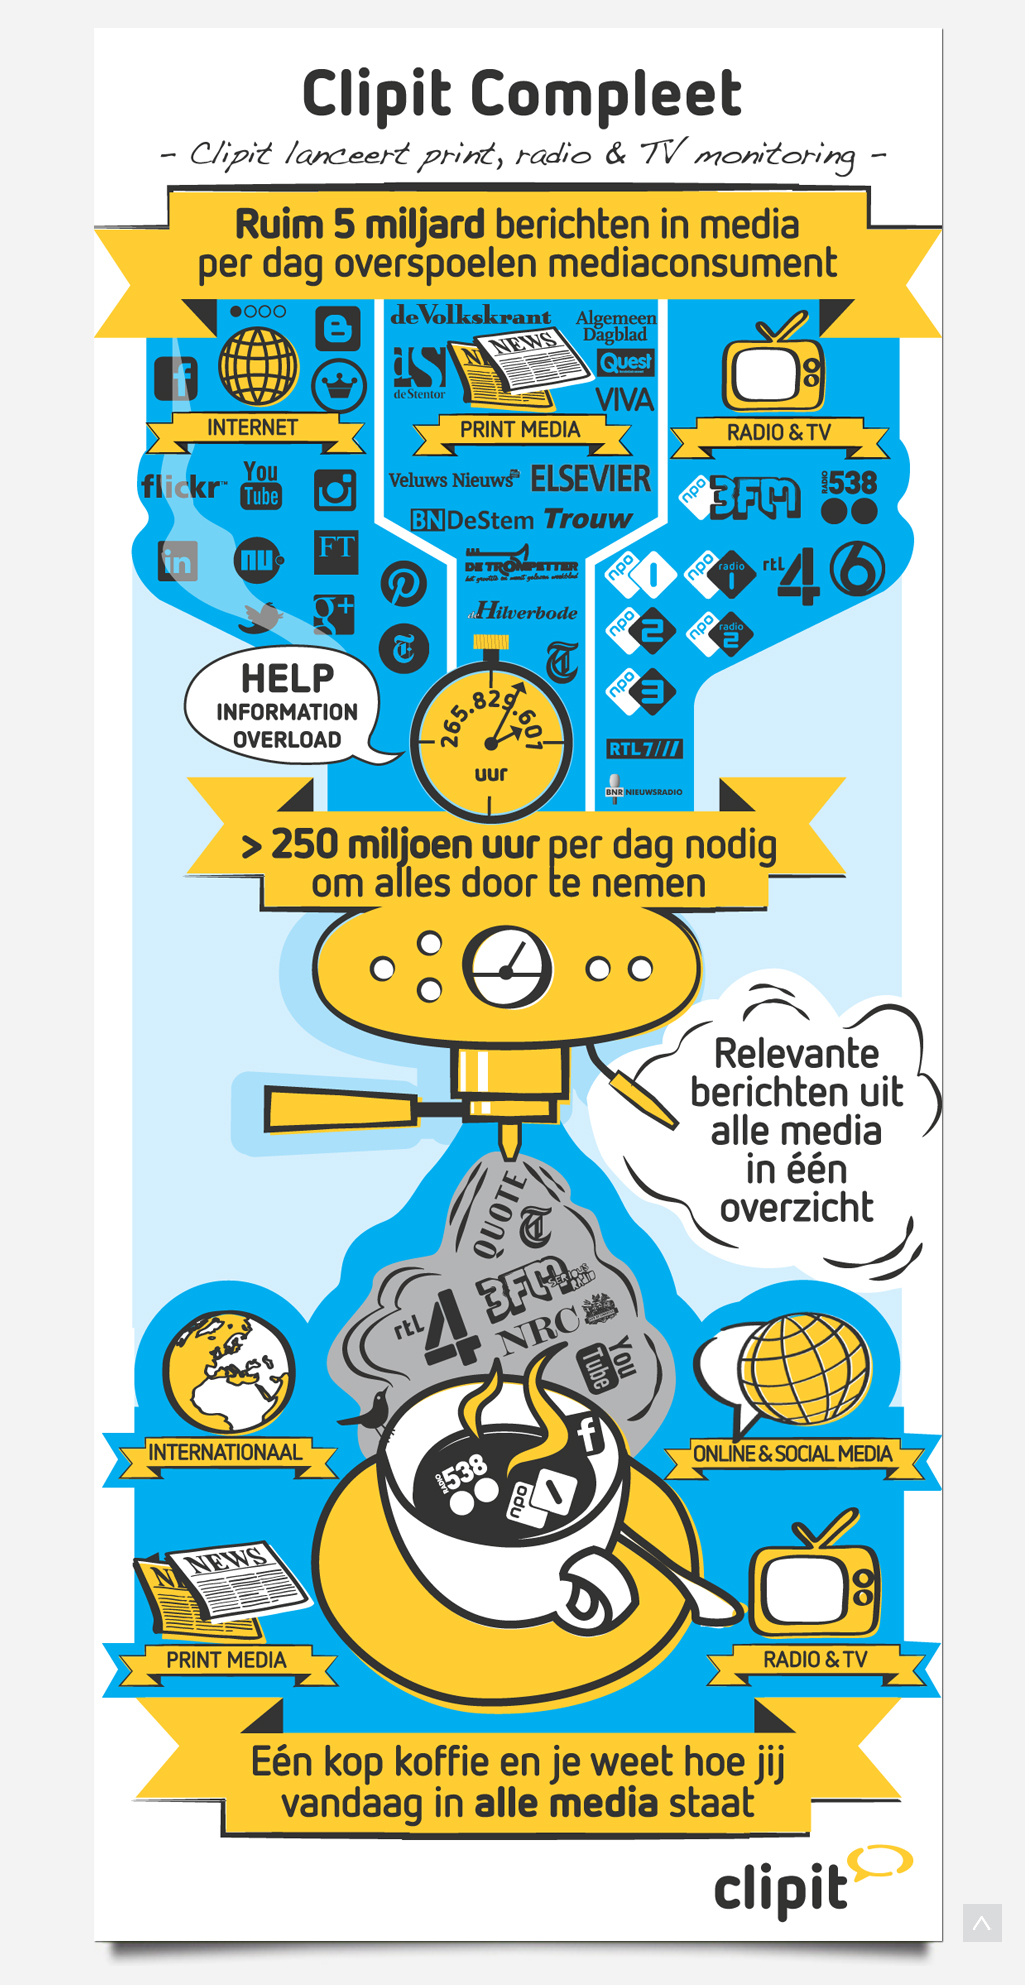 Infographic Clipit Compleet